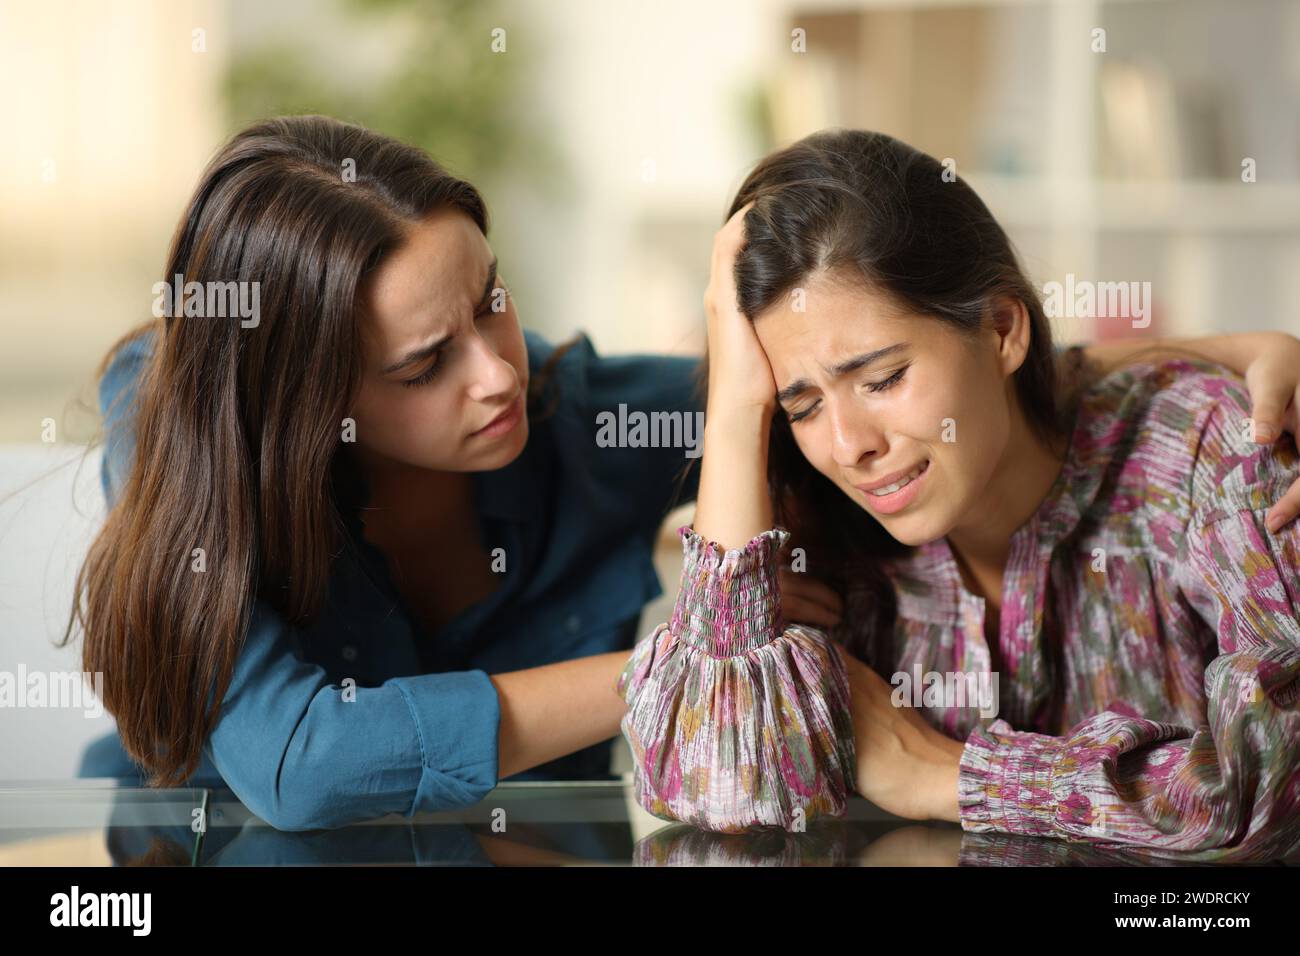 Good friend comforting a sad woman at home Stock Photo